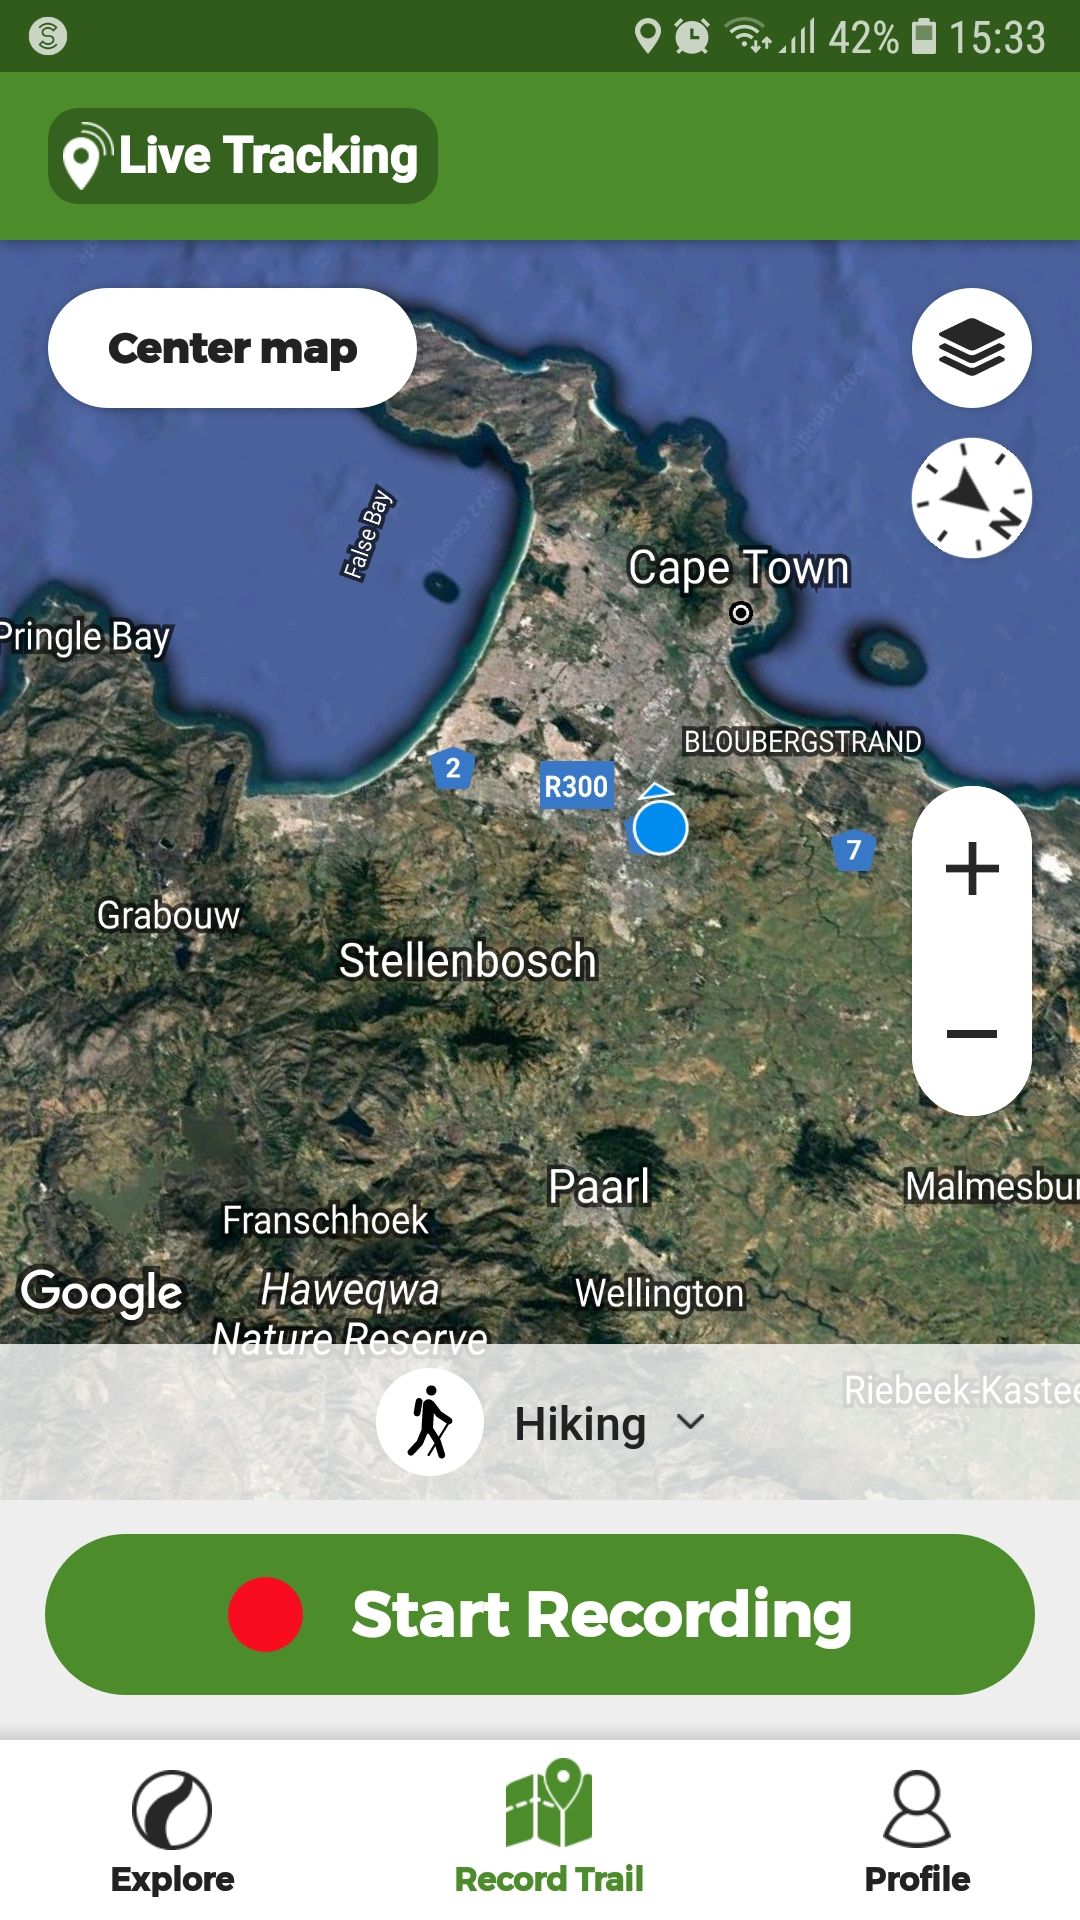 Wikiloc mobile hiking route app live tracking